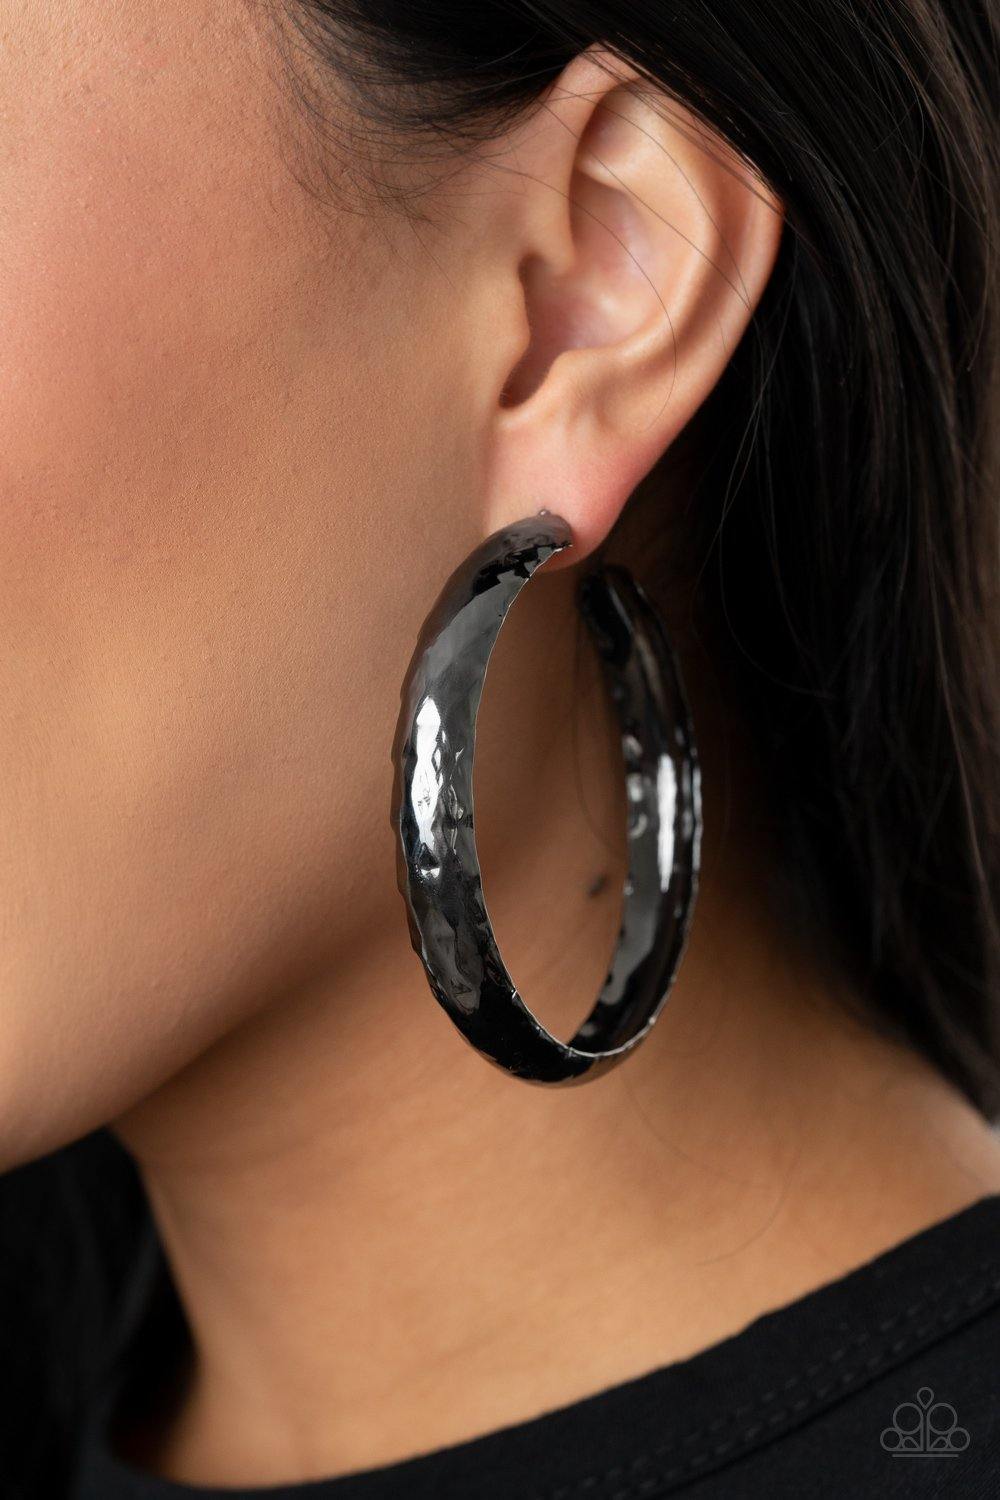 Check Out These Curves - Black Earrings - Paparazzi Accessories - Sassysblingandthings